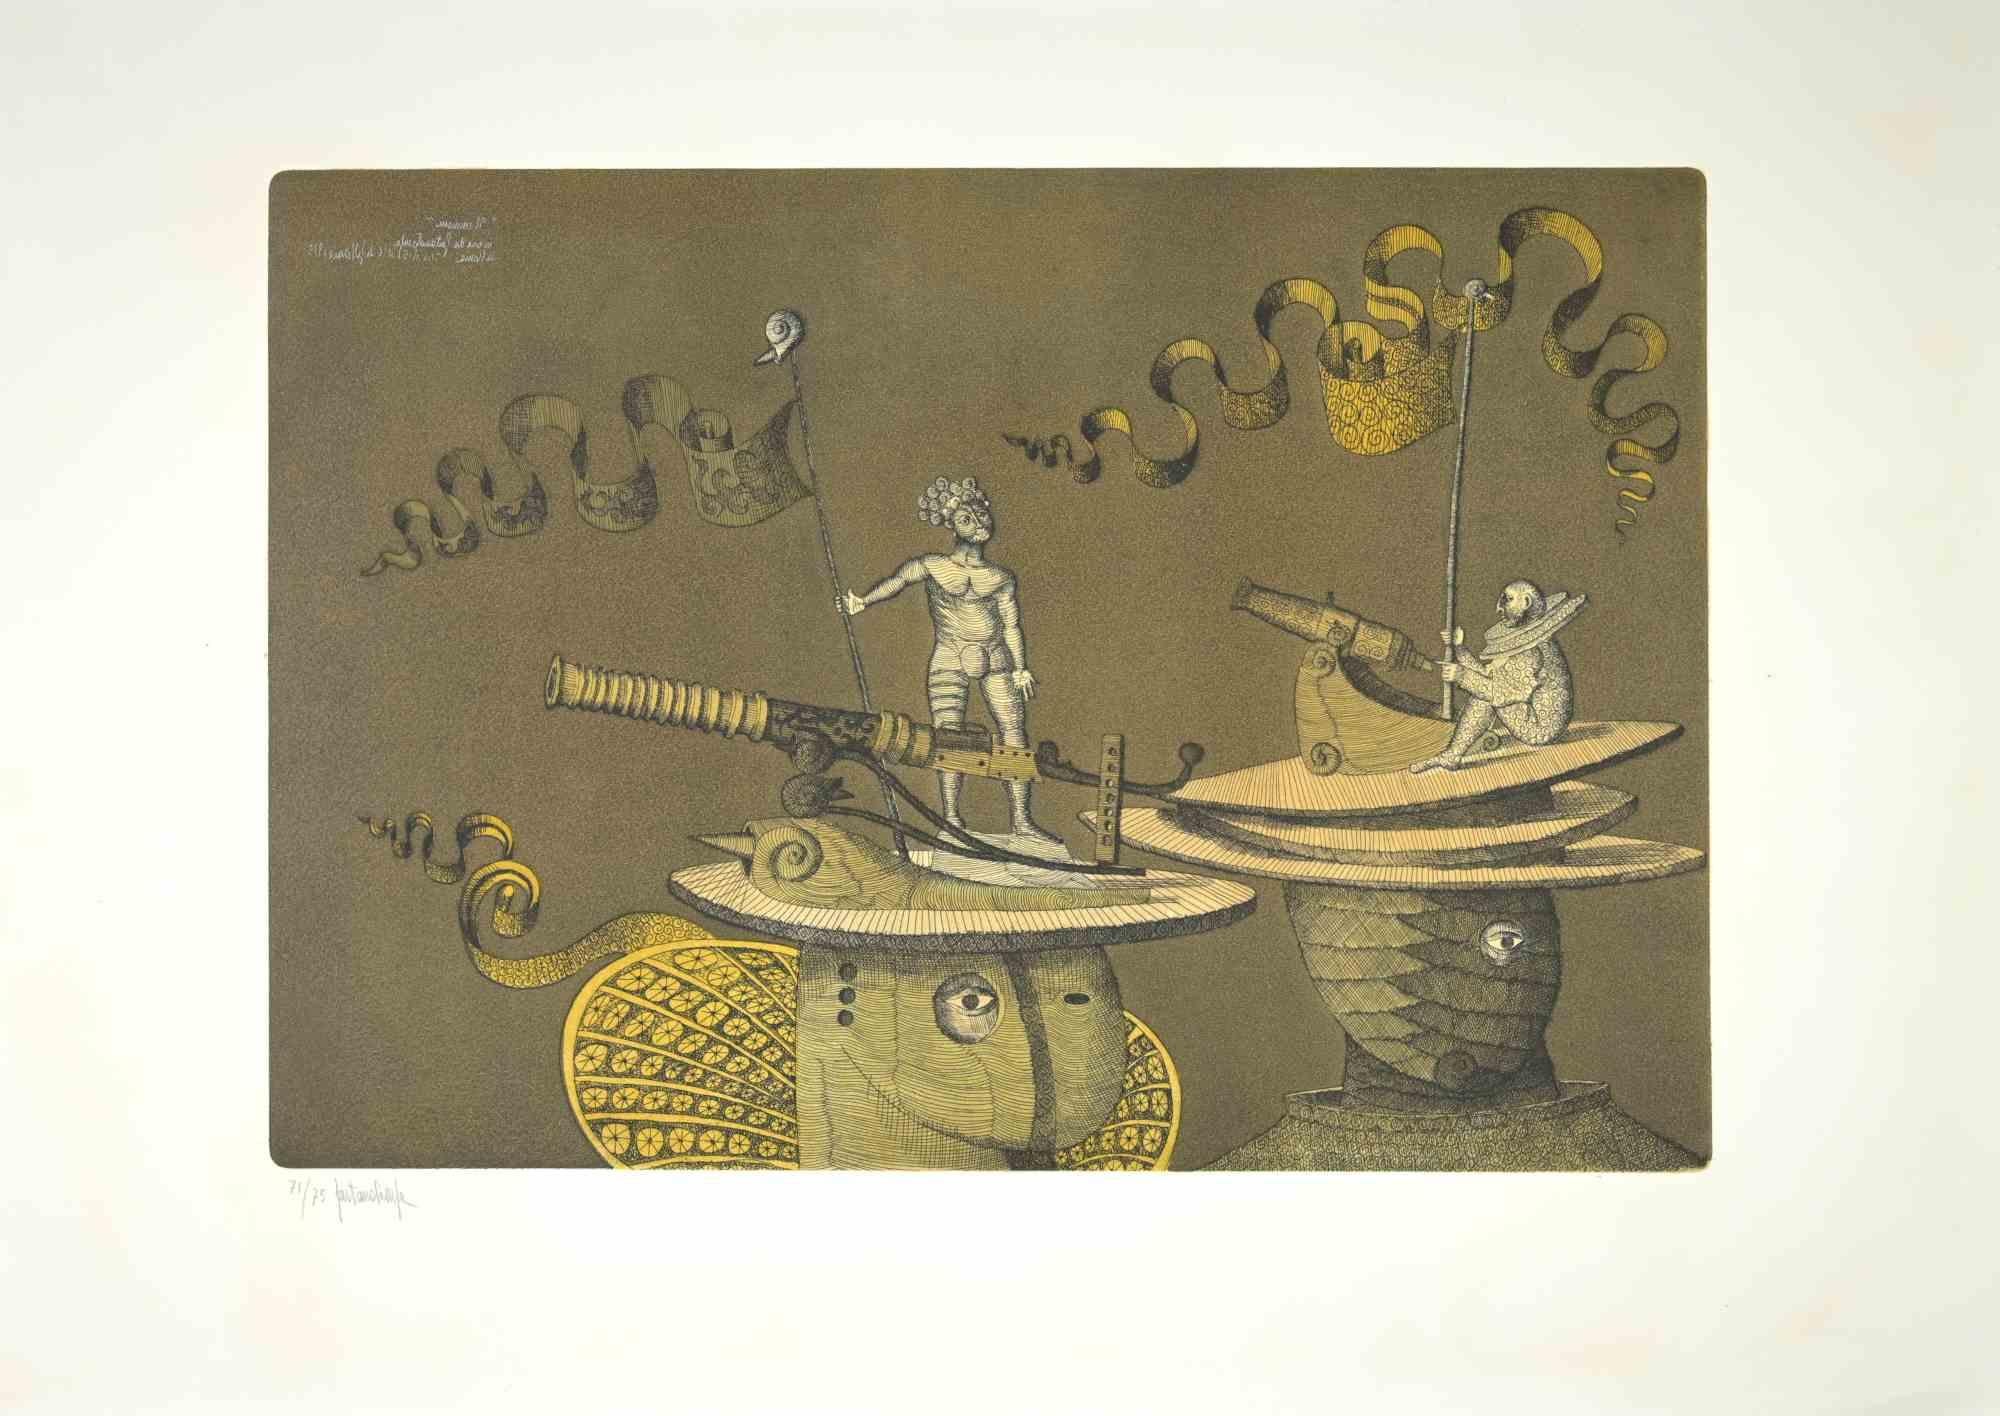 The Imaginary Men is an artwork realized by Gaetano Pompa (1933, Forenza- 1998) in 1970s.

Aquatint and etching on paper.

Hand signed on the left corner. Edition of 75, numbered, 71. 

Excellent condition.

Gaetano Pompa  was born in 1933 in